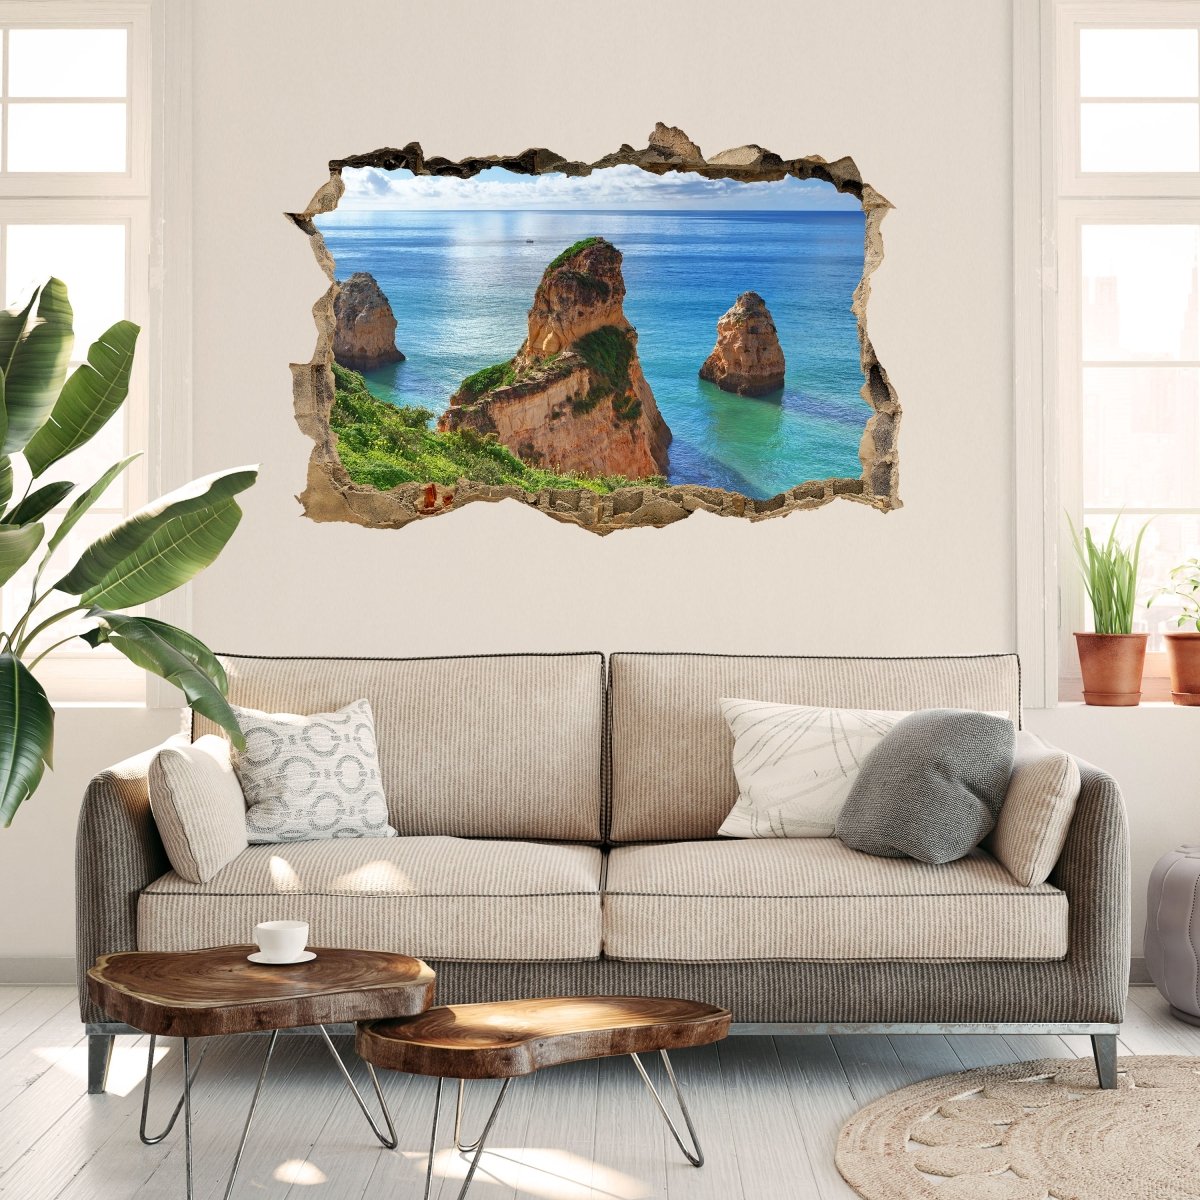 3D wall sticker Amazing view from the coast - wall decal M0884